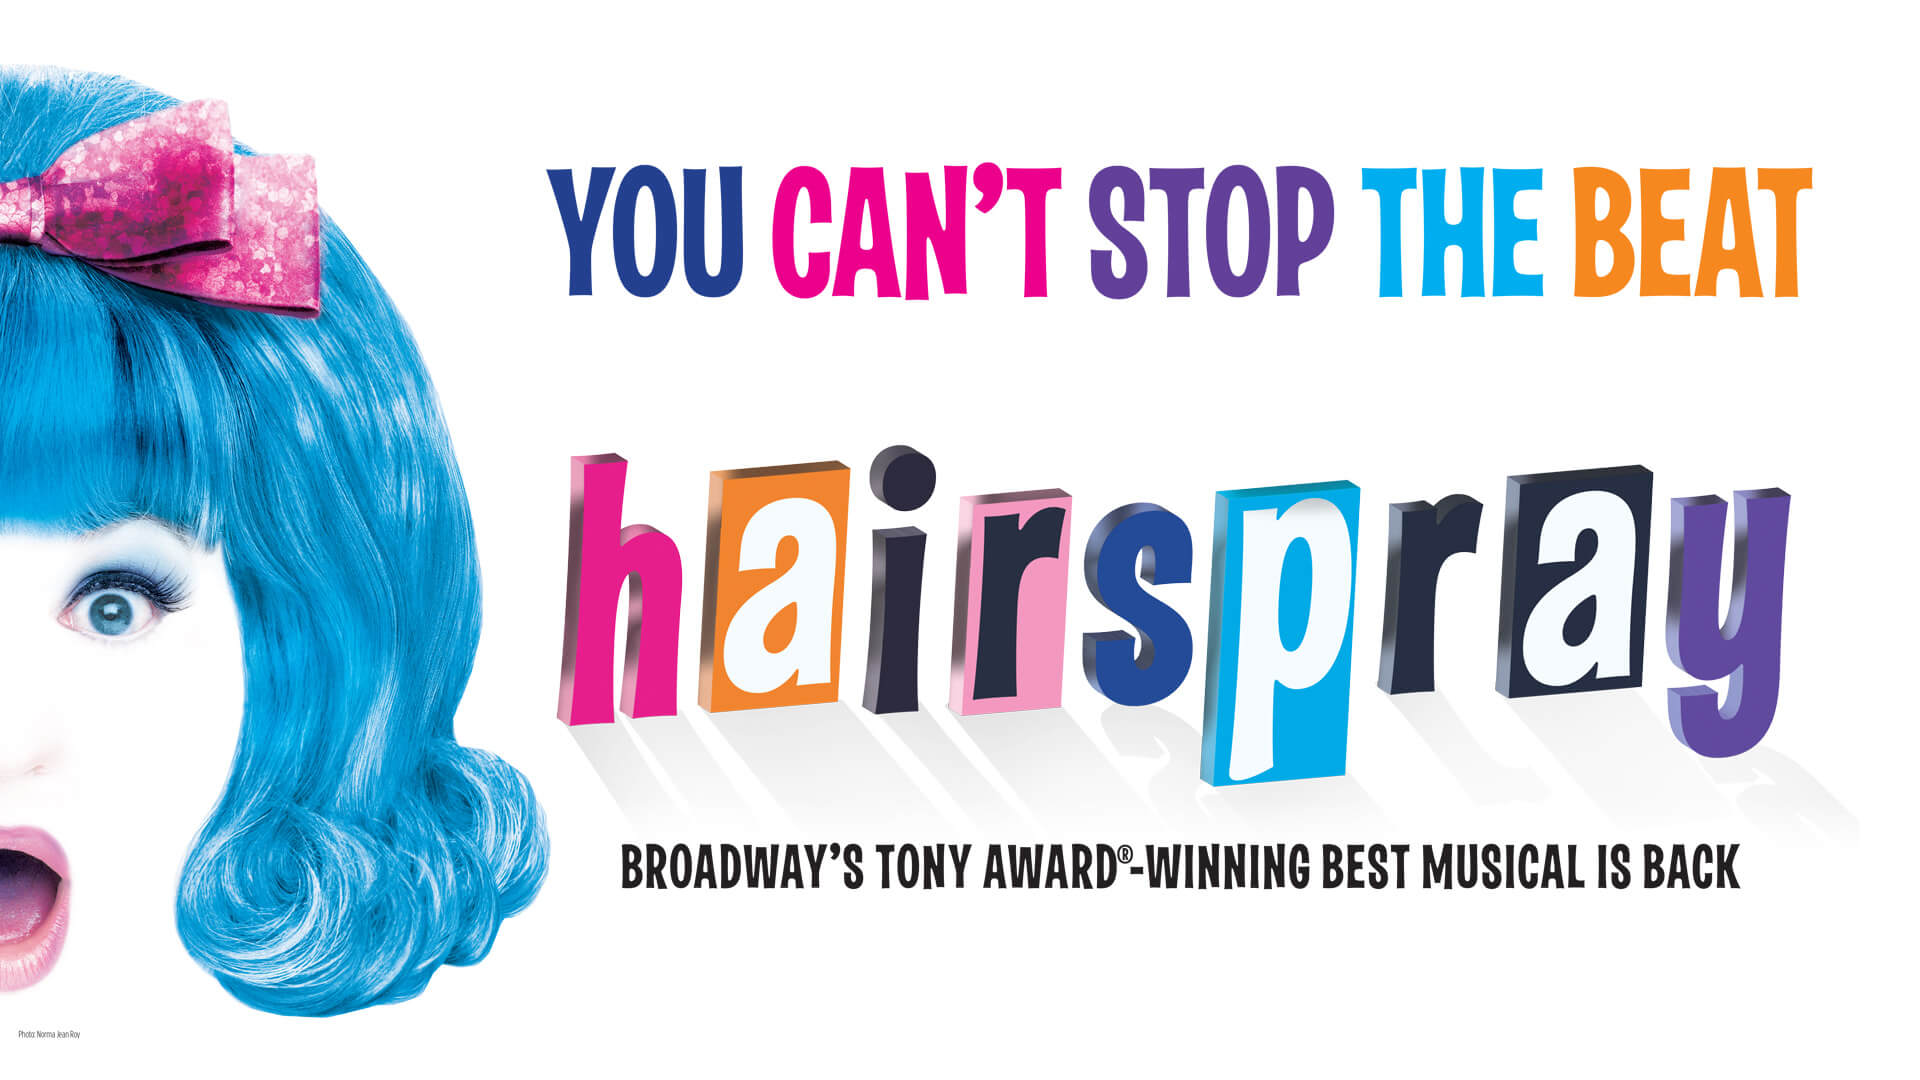 "You can't stop the beat" - Hairspray - Broadway's Tony Award-winning best musical